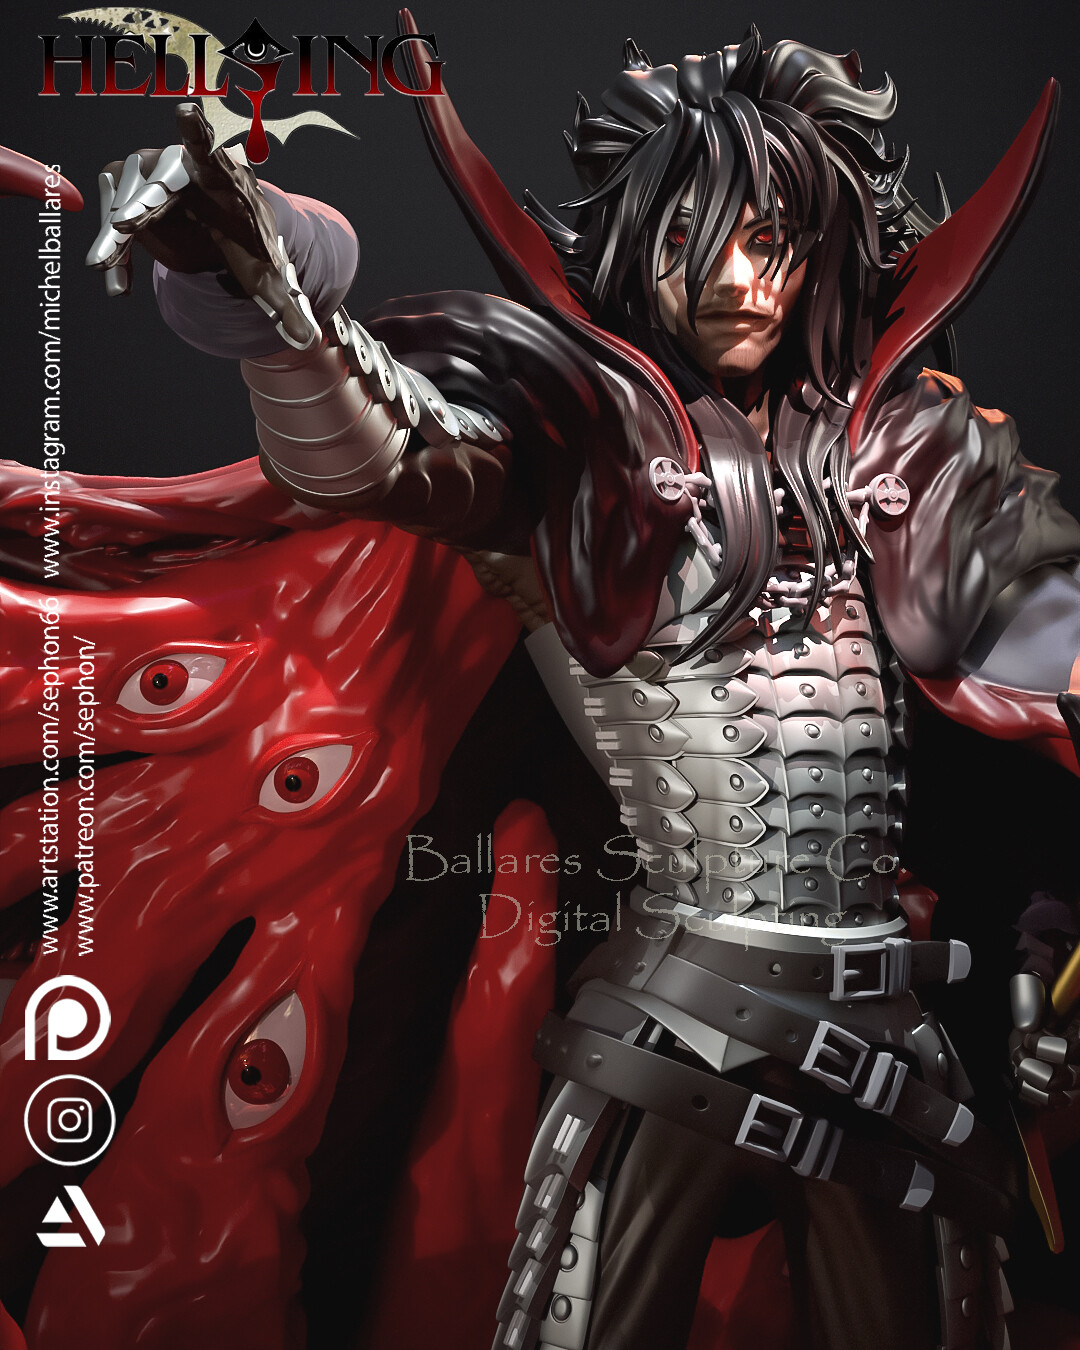 Alucard or Count Dracula From Hellsing Collectible 3d 